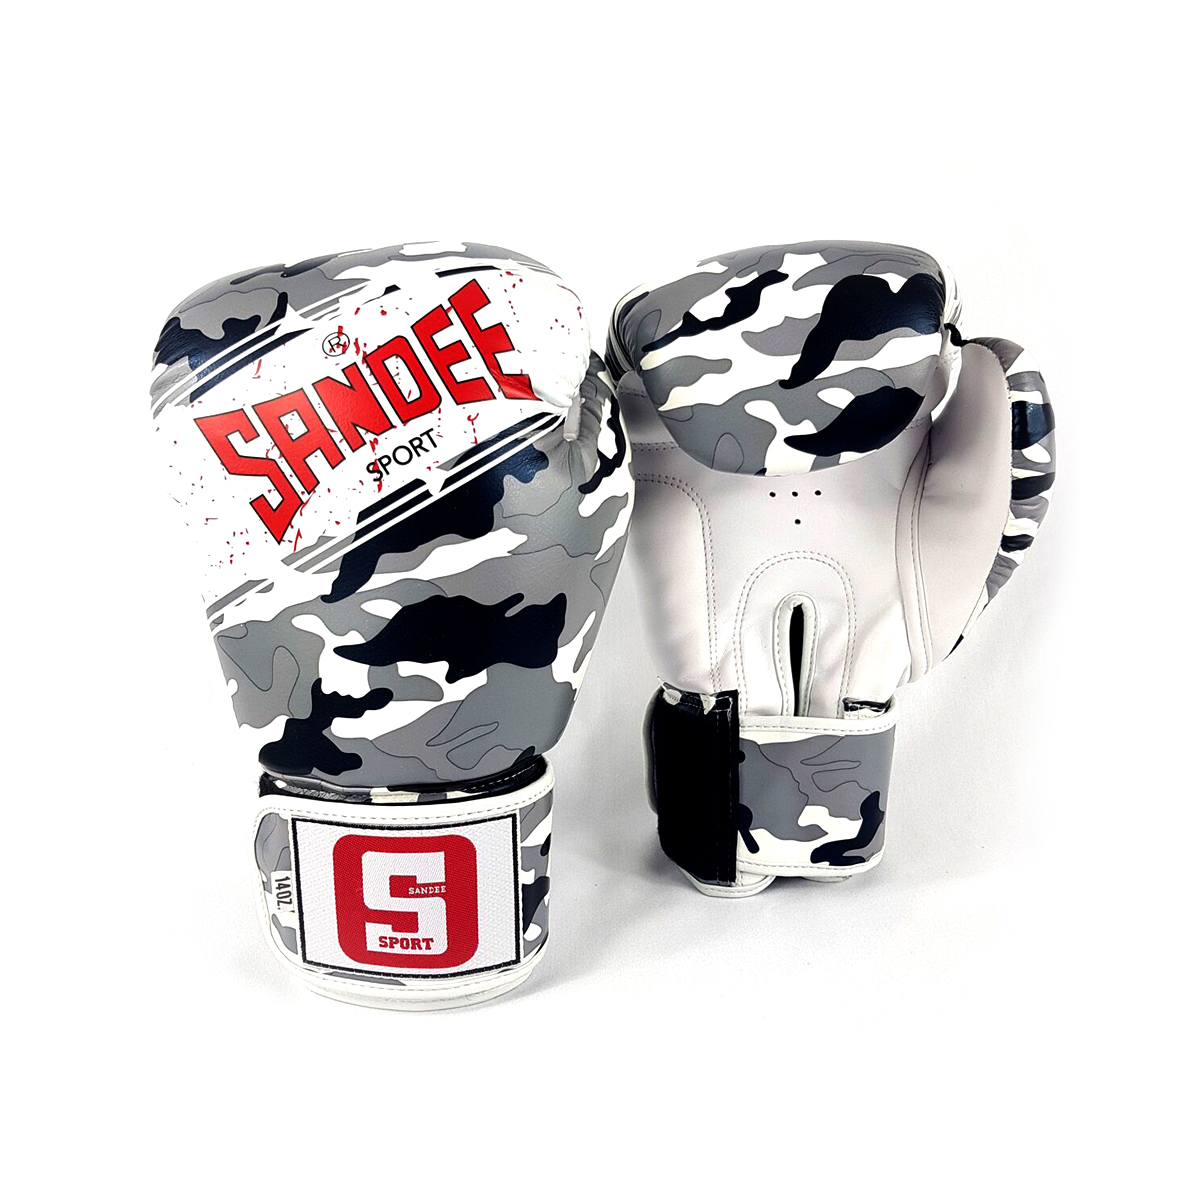 Sandee Sport Muay Thai Boxing Gloves - Camo - Click Image to Close